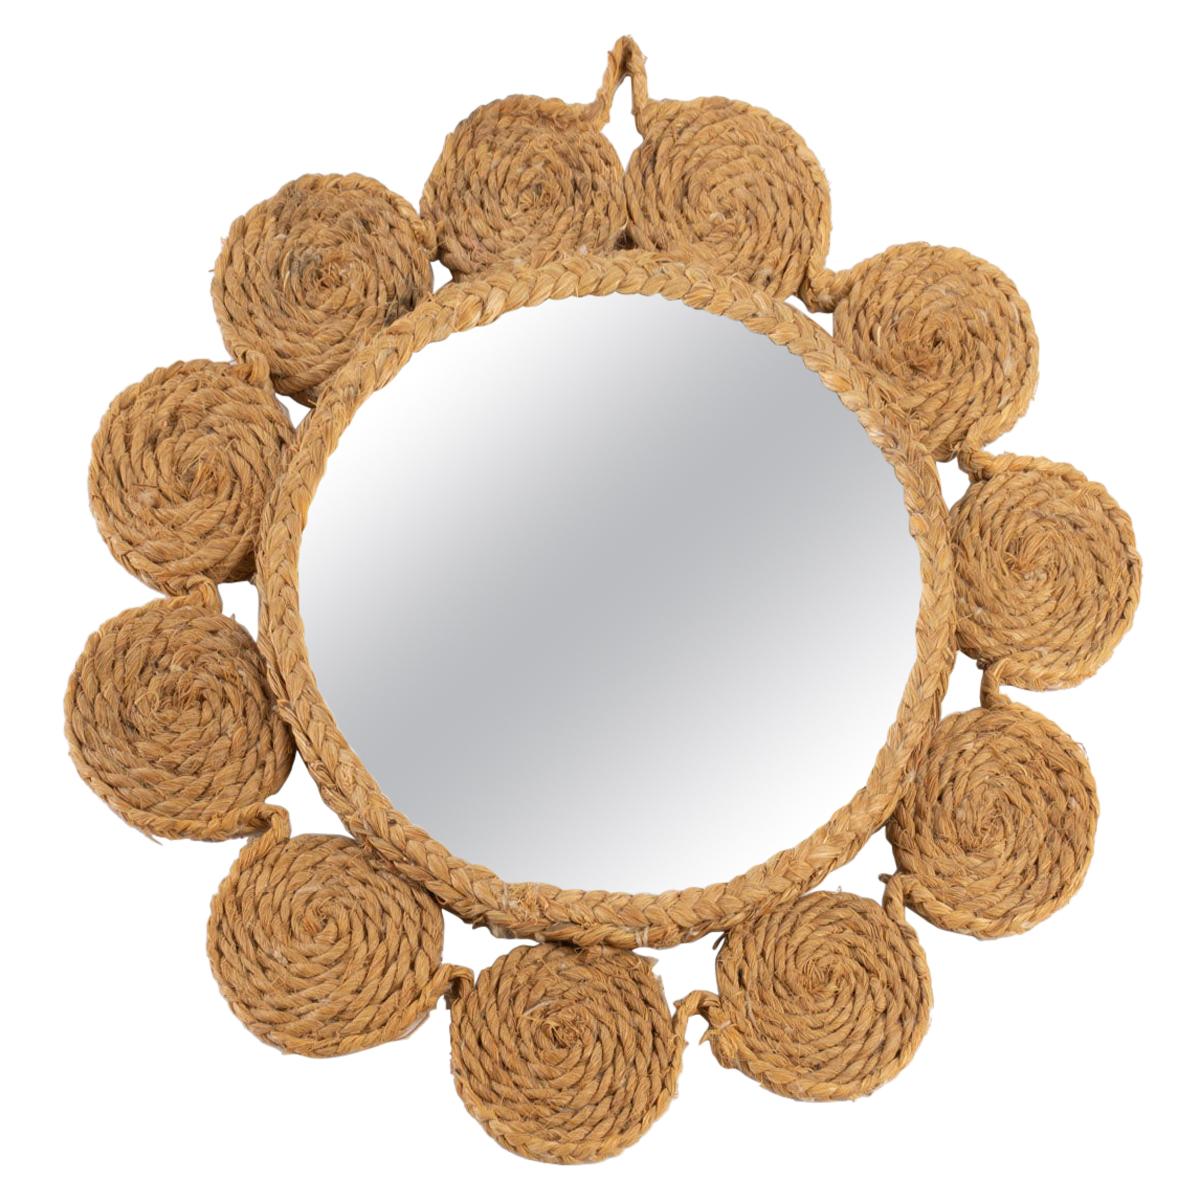 Round mirror dressed in an entourage of rope sewn together forming small circles nicely marrying the environment of the mirror.

Adrien Audoux and Frida Minet are known for their rope lights and furniture. Their first workshop has been founded in